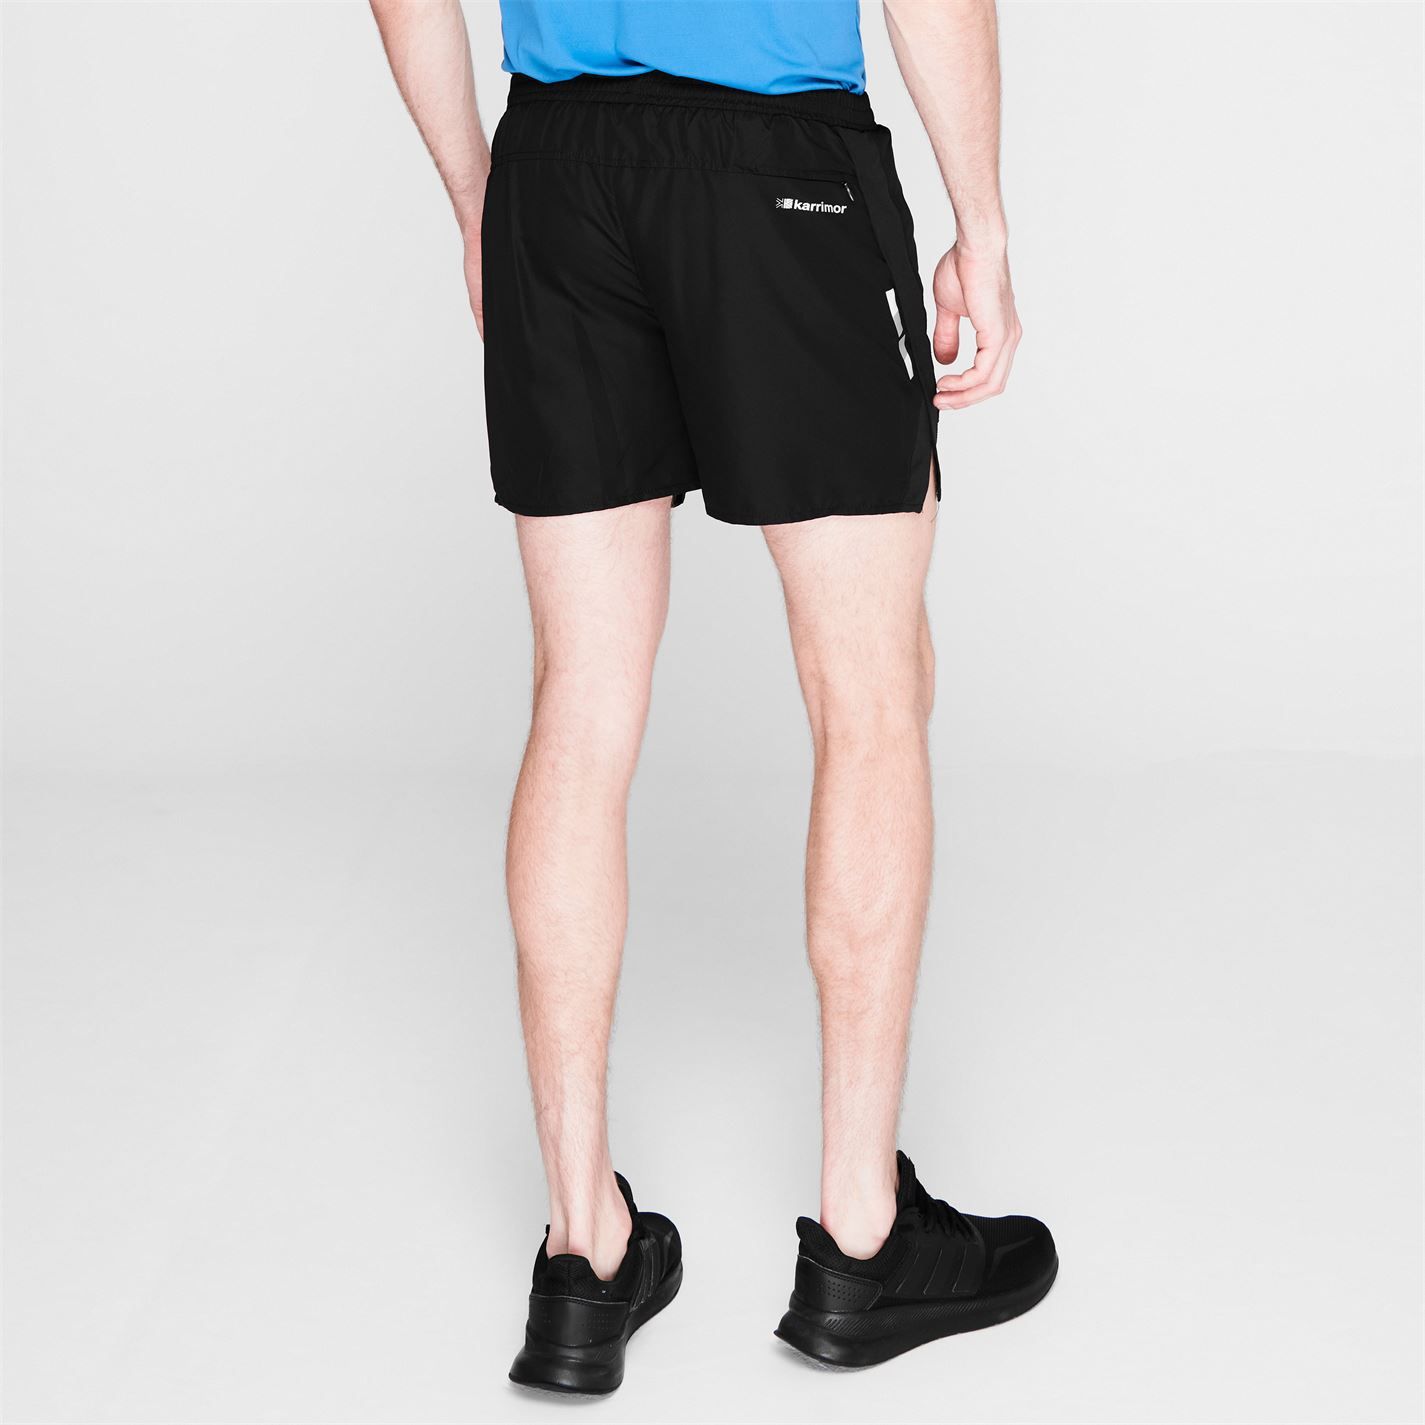 <strong> Karrimor 5inch Running Shorts Mens </strong><br><br> Conquer your next workout with the 5inch Running Shorts from Karrimor. Crafted with a lightweight and breathable fabric, these shorts deliver outstanding moisture management to help keep you cool and dry. Design is finished with elasticated waistband, internal drawstring tie, and reflective elements.<br>> Men's running shorts<br>> Elasticated waist with internal drawstring<br>> Internal briefs<br>> Secure zipped pocket to reverse<br>> Sweat wicking<br>> Reflective details<br>> 100% polyester<br>> Machine washable at 30 degrees<br>> Signature Karrimor branding